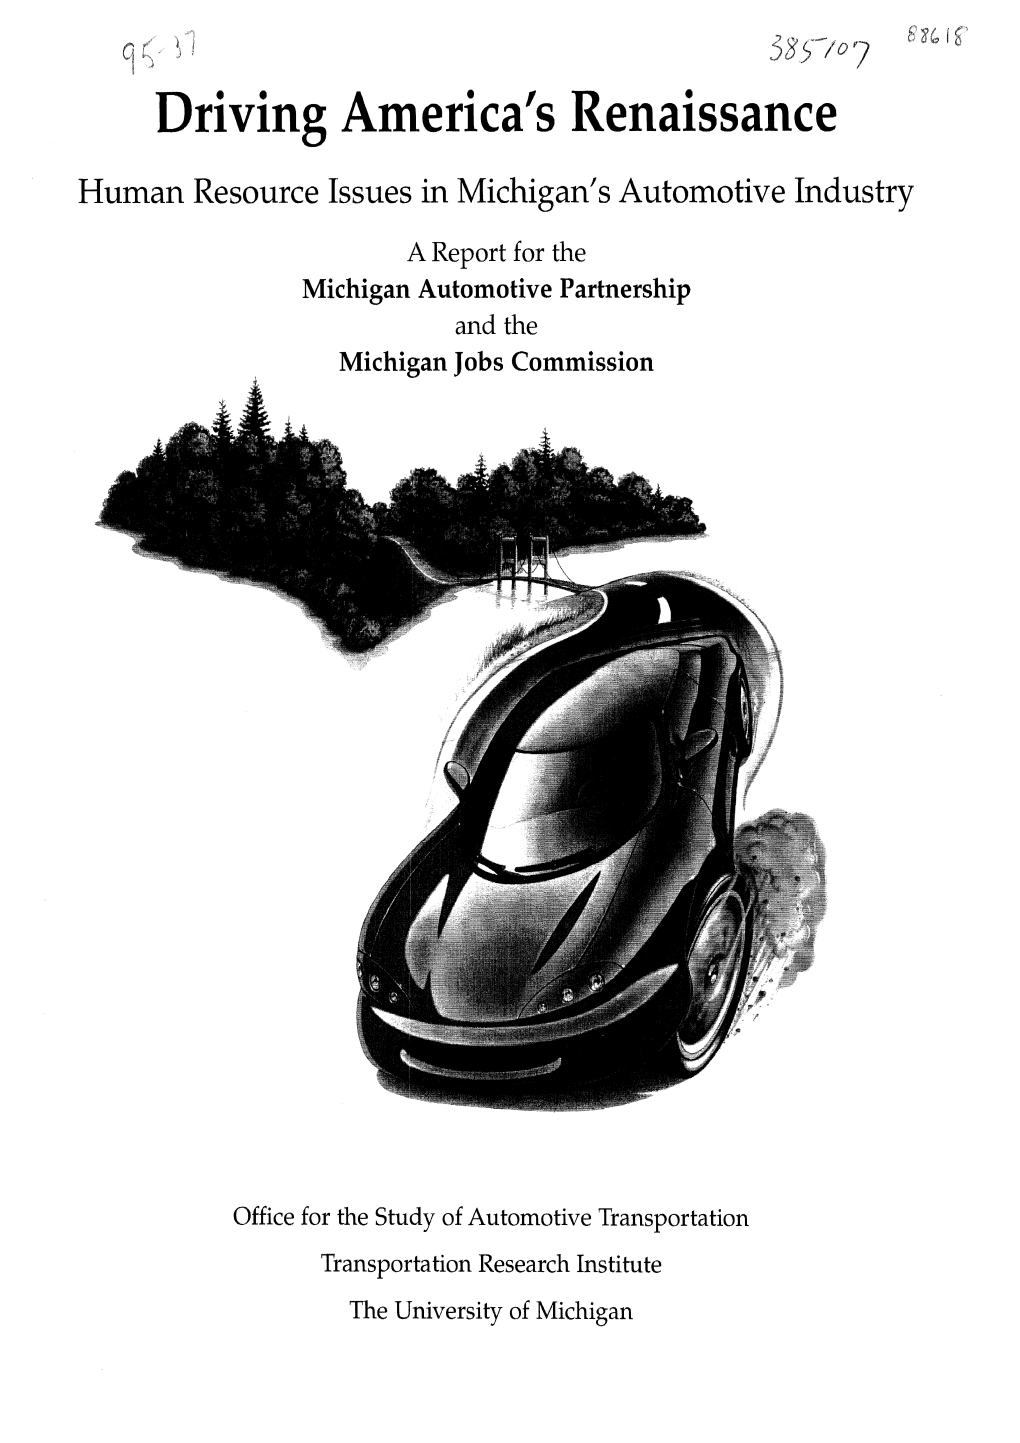 Driving America's Renaissance Human Resource Issues in Michigan's Automotive Industry